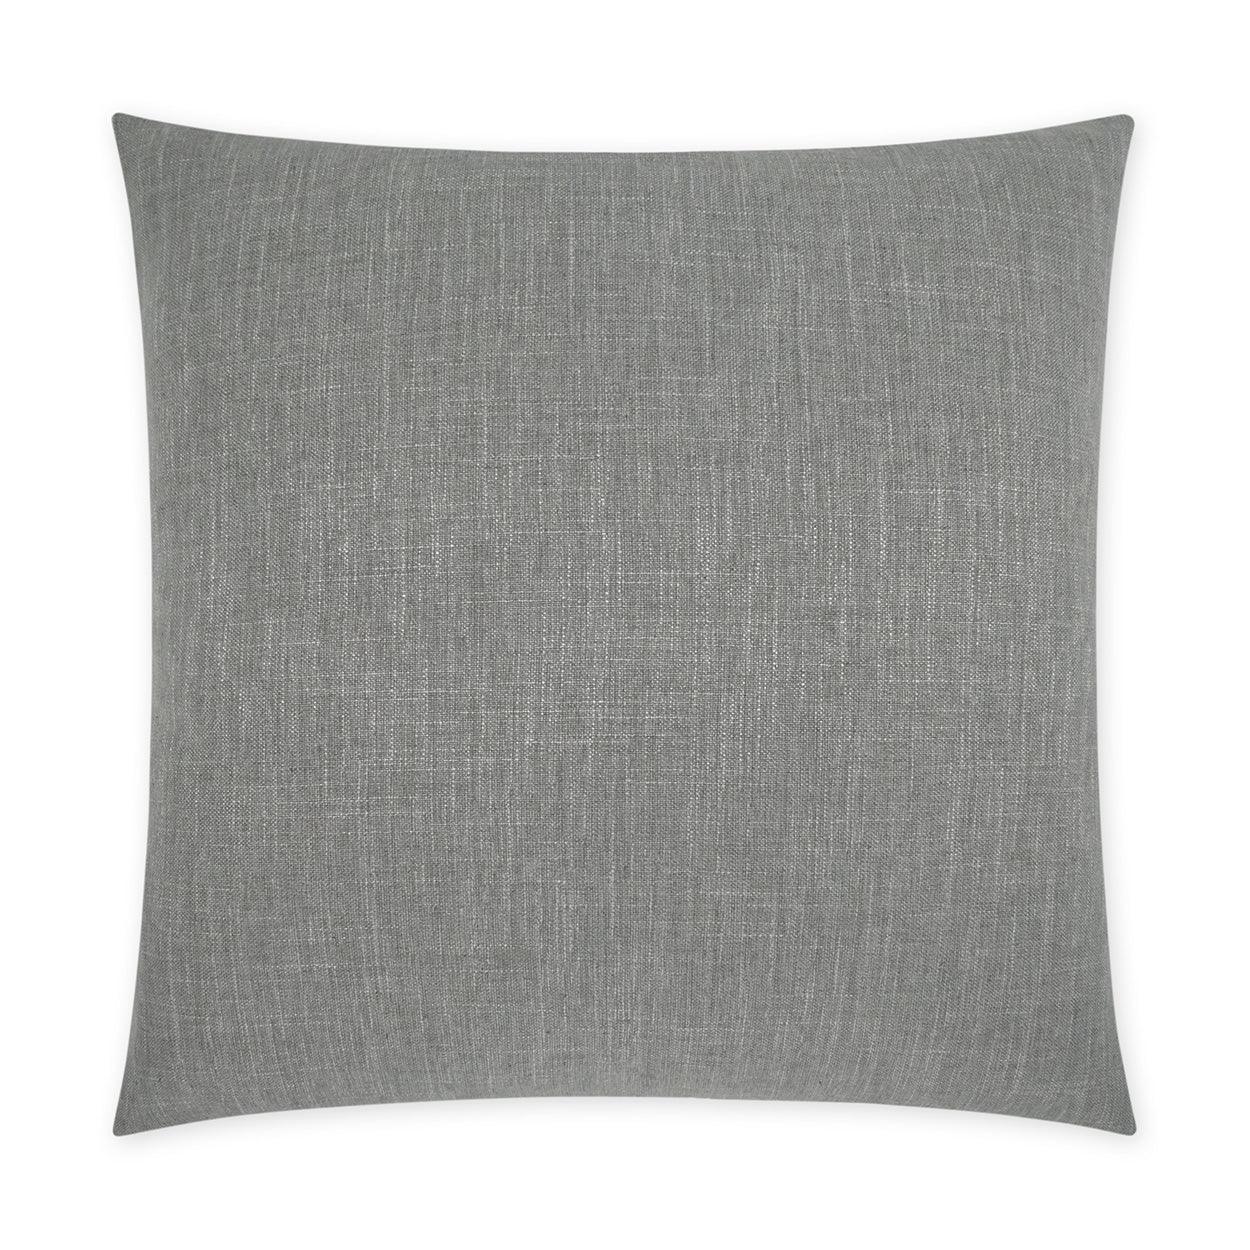 Lena Grey Beach Solid Grey Large Throw Pillow With Insert - Uptown Sebastian